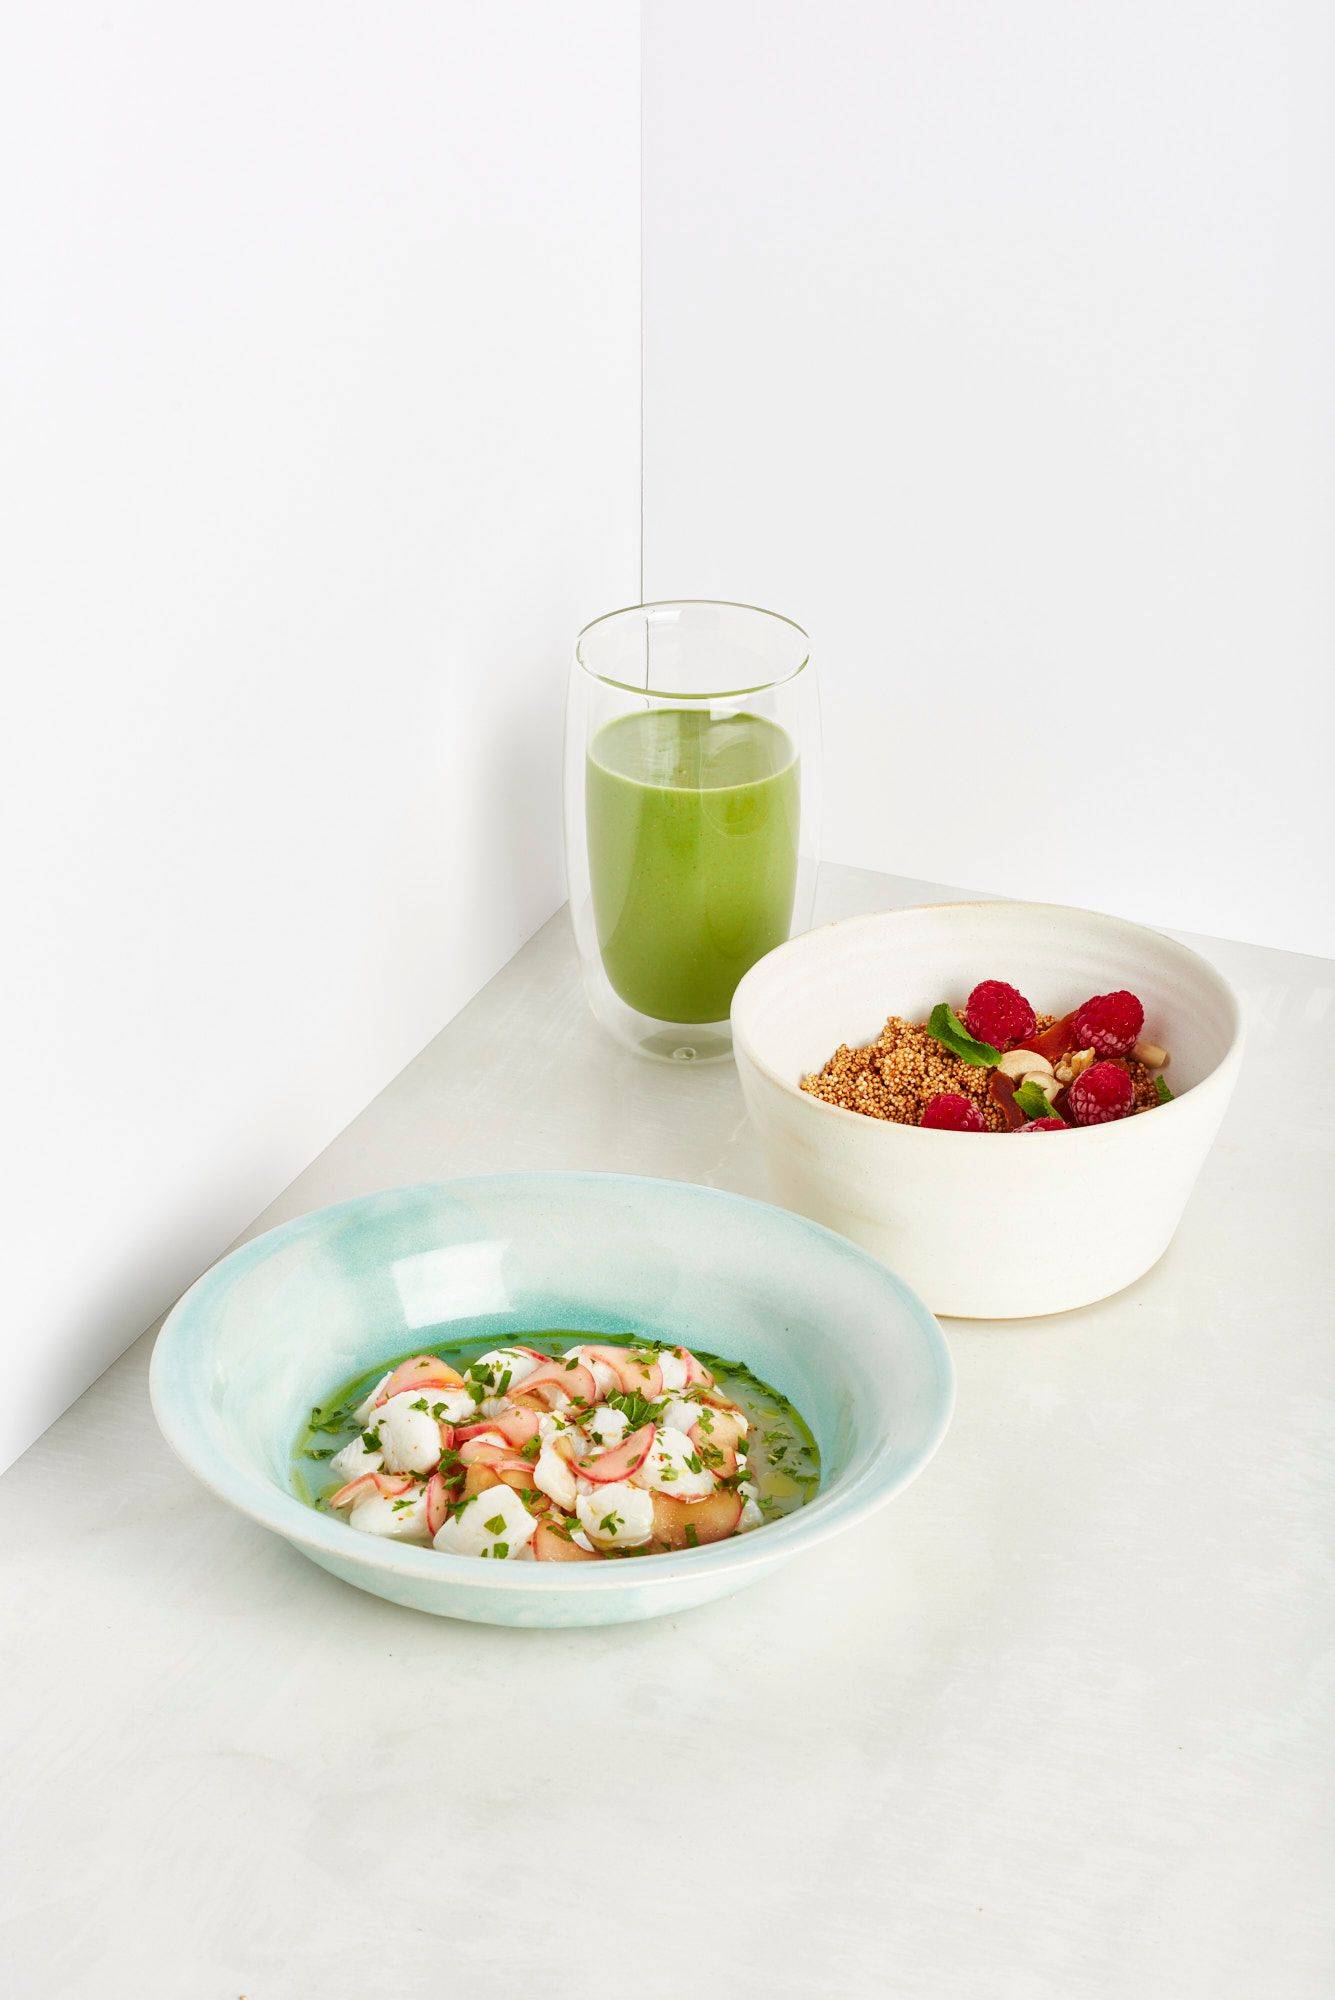 hangover breakfast with sorrel smoothie amaranth bowl and rhubarb ceviche on white background